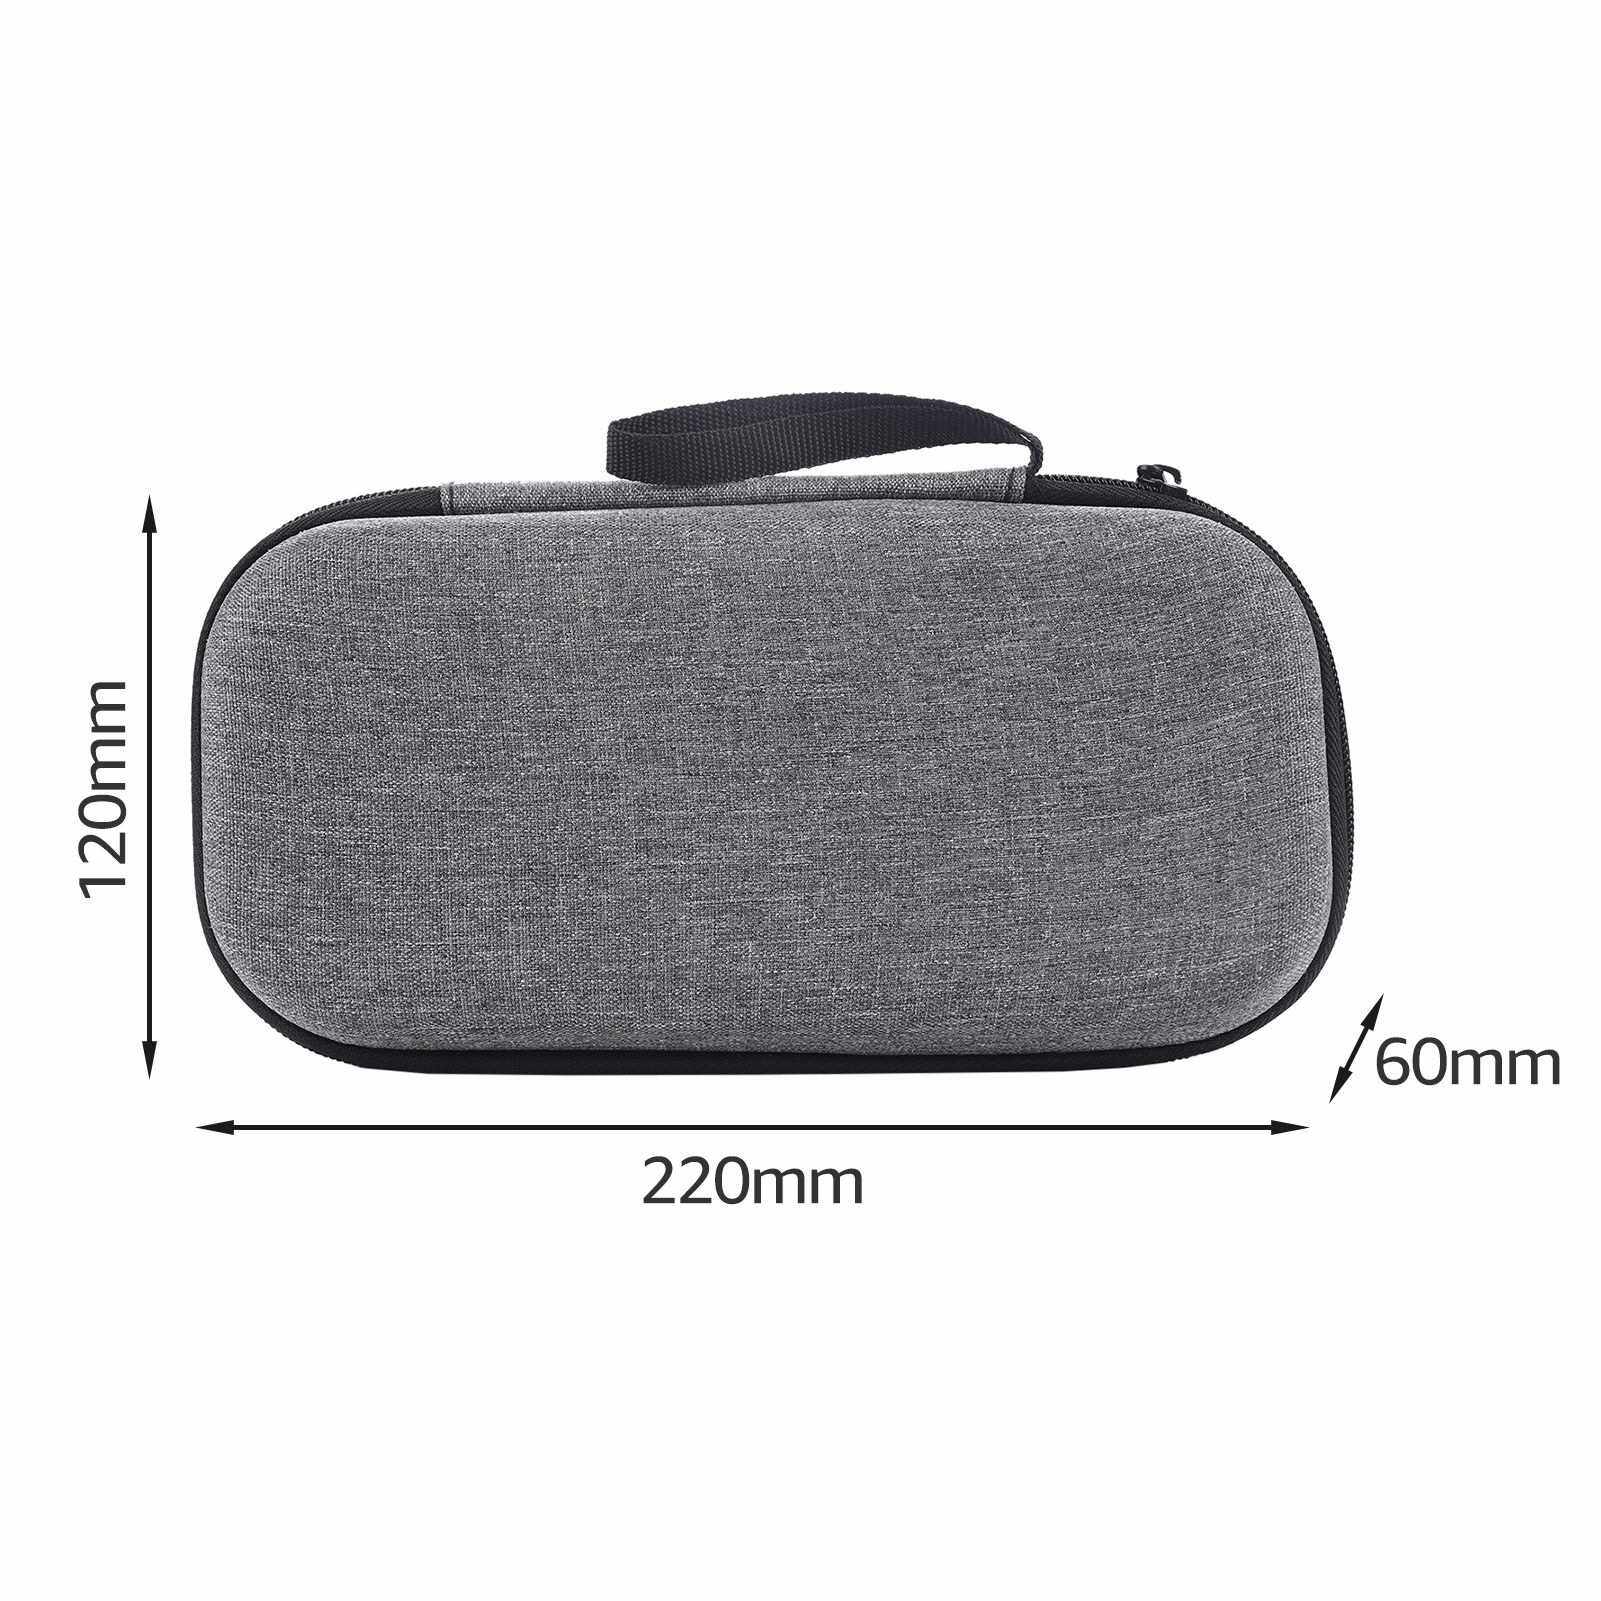 People's Choice Gimbal Portable Bag Waterproof Storage Bag Stabilizer Carrying Case with Lanyard Replacement for Hohem iSteady X Zhiyun XS Feiyu Vimble One Smartphone Gimbal (Grey)